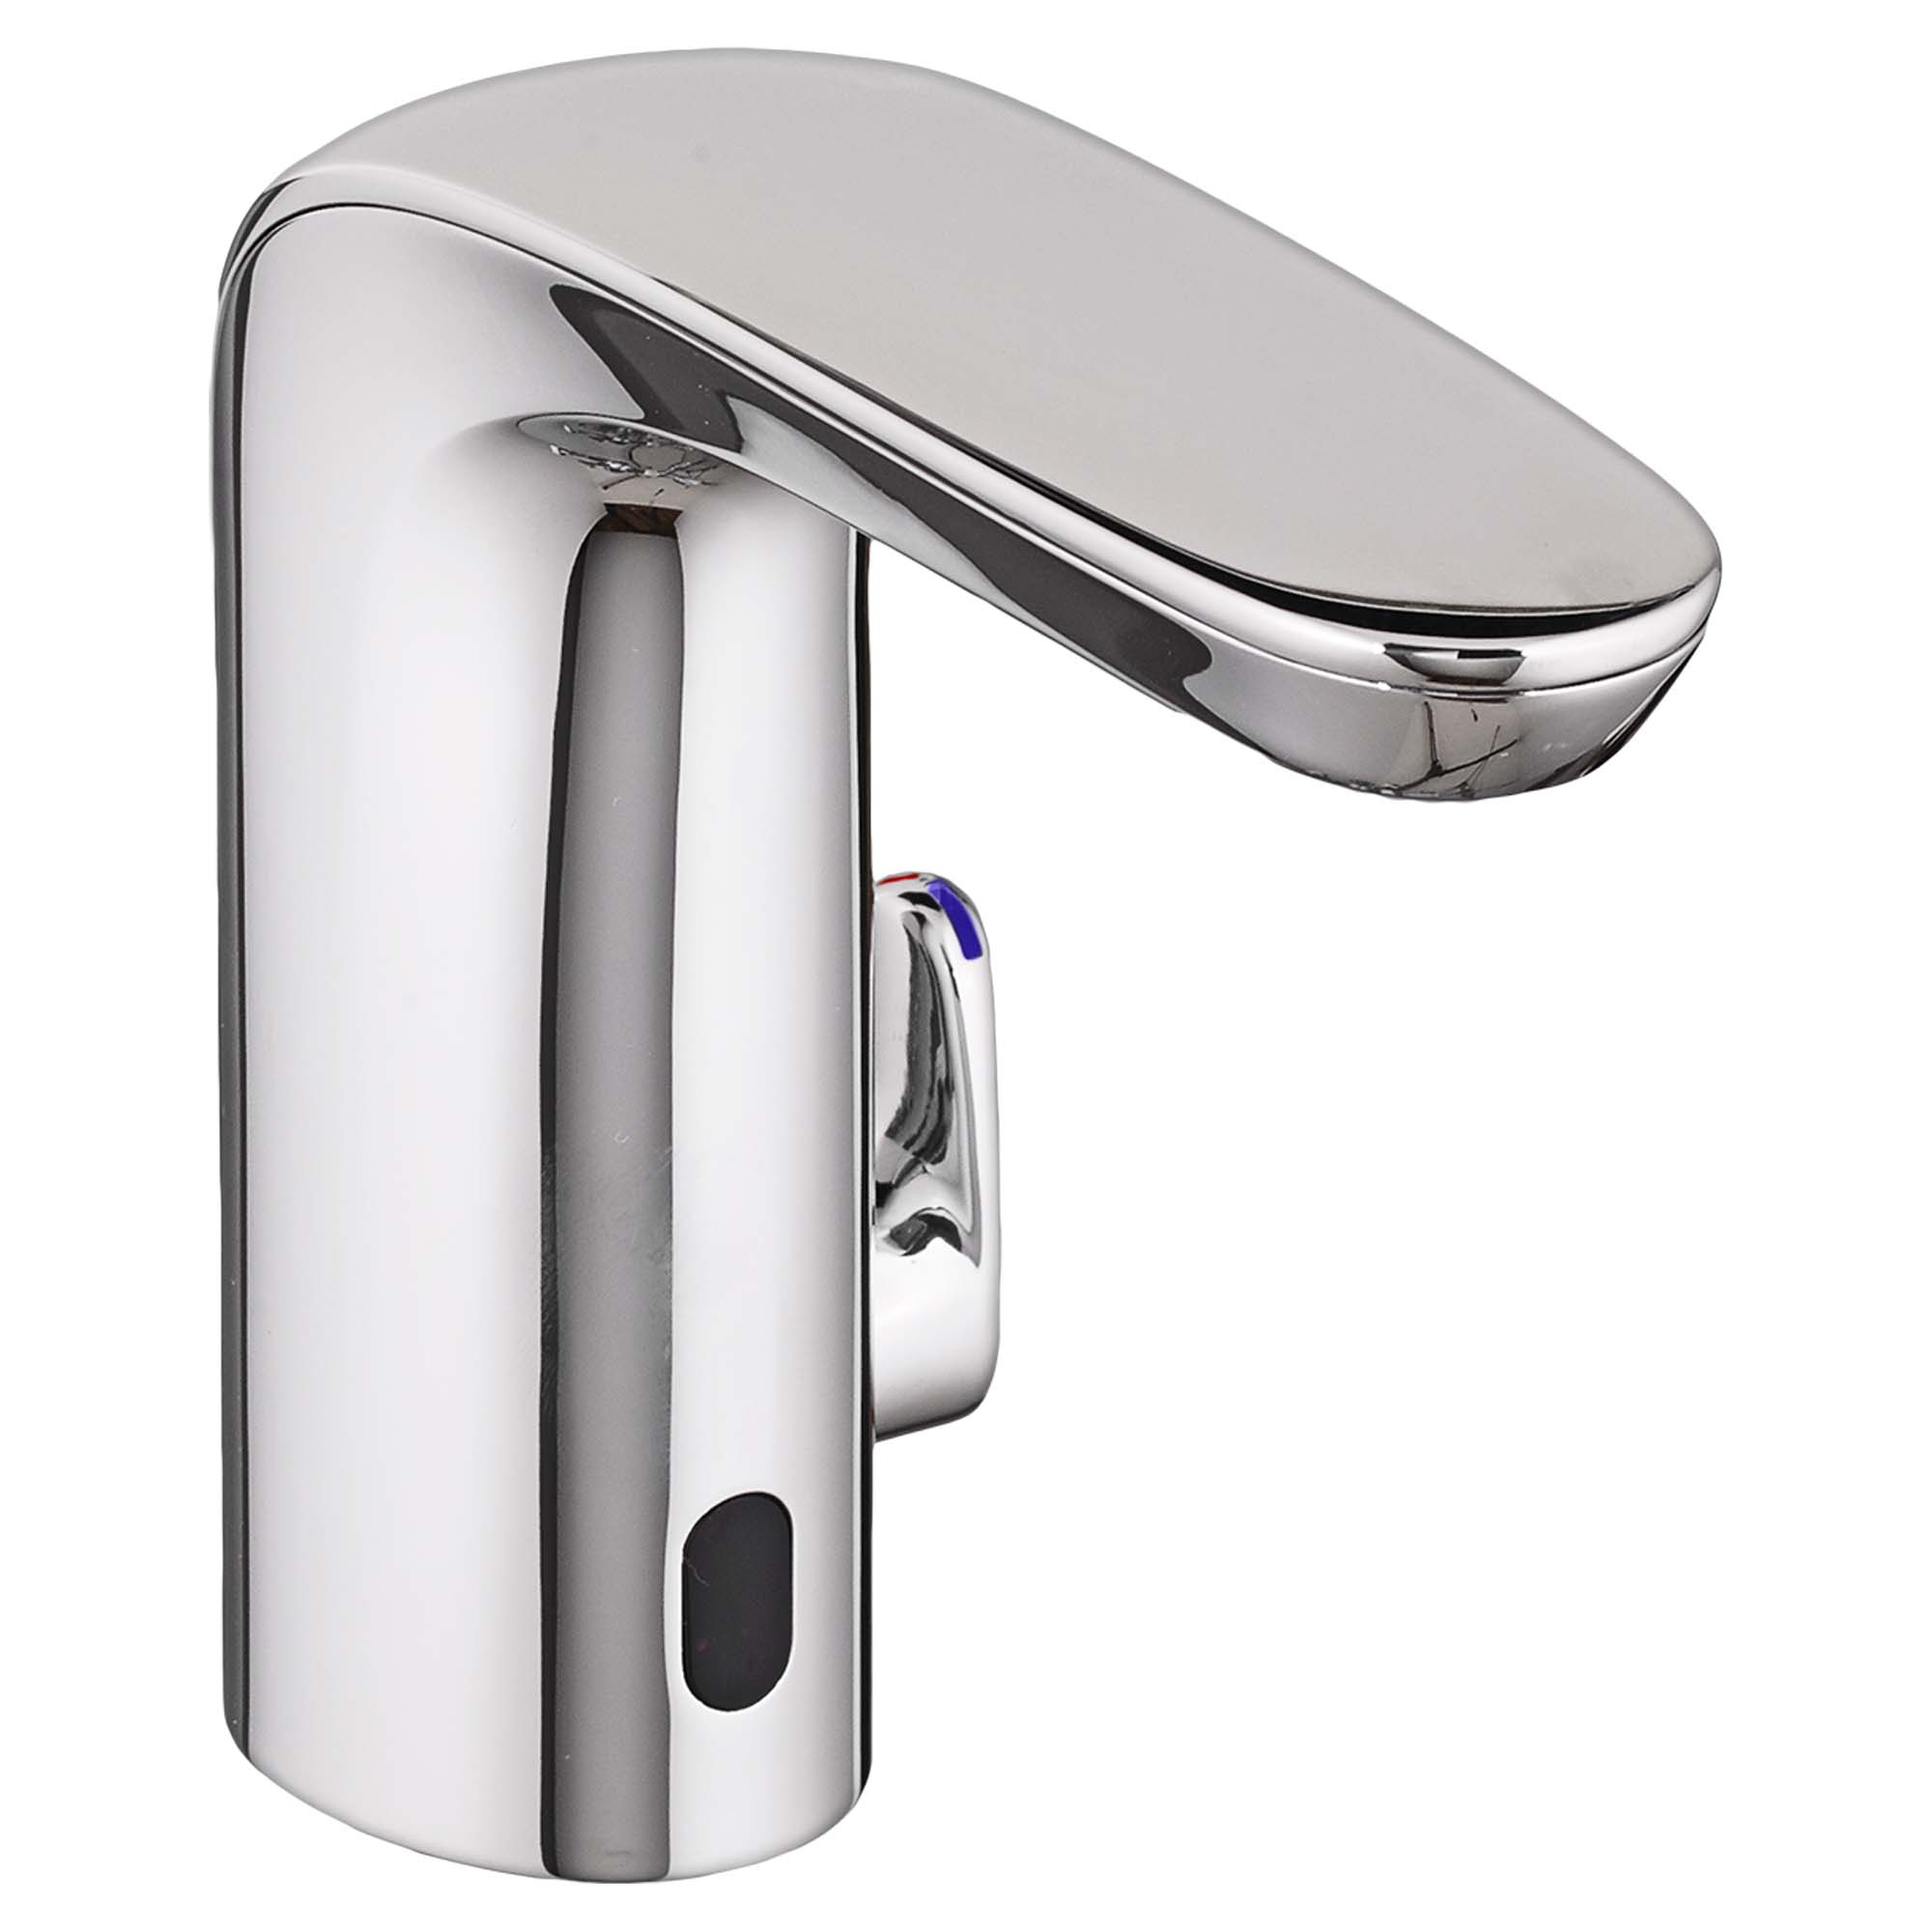 NextGen™ Selectronic™ Touchless Faucet, Base Model With Above-Deck Mixing, 1.5 gpm/5.7 Lpm